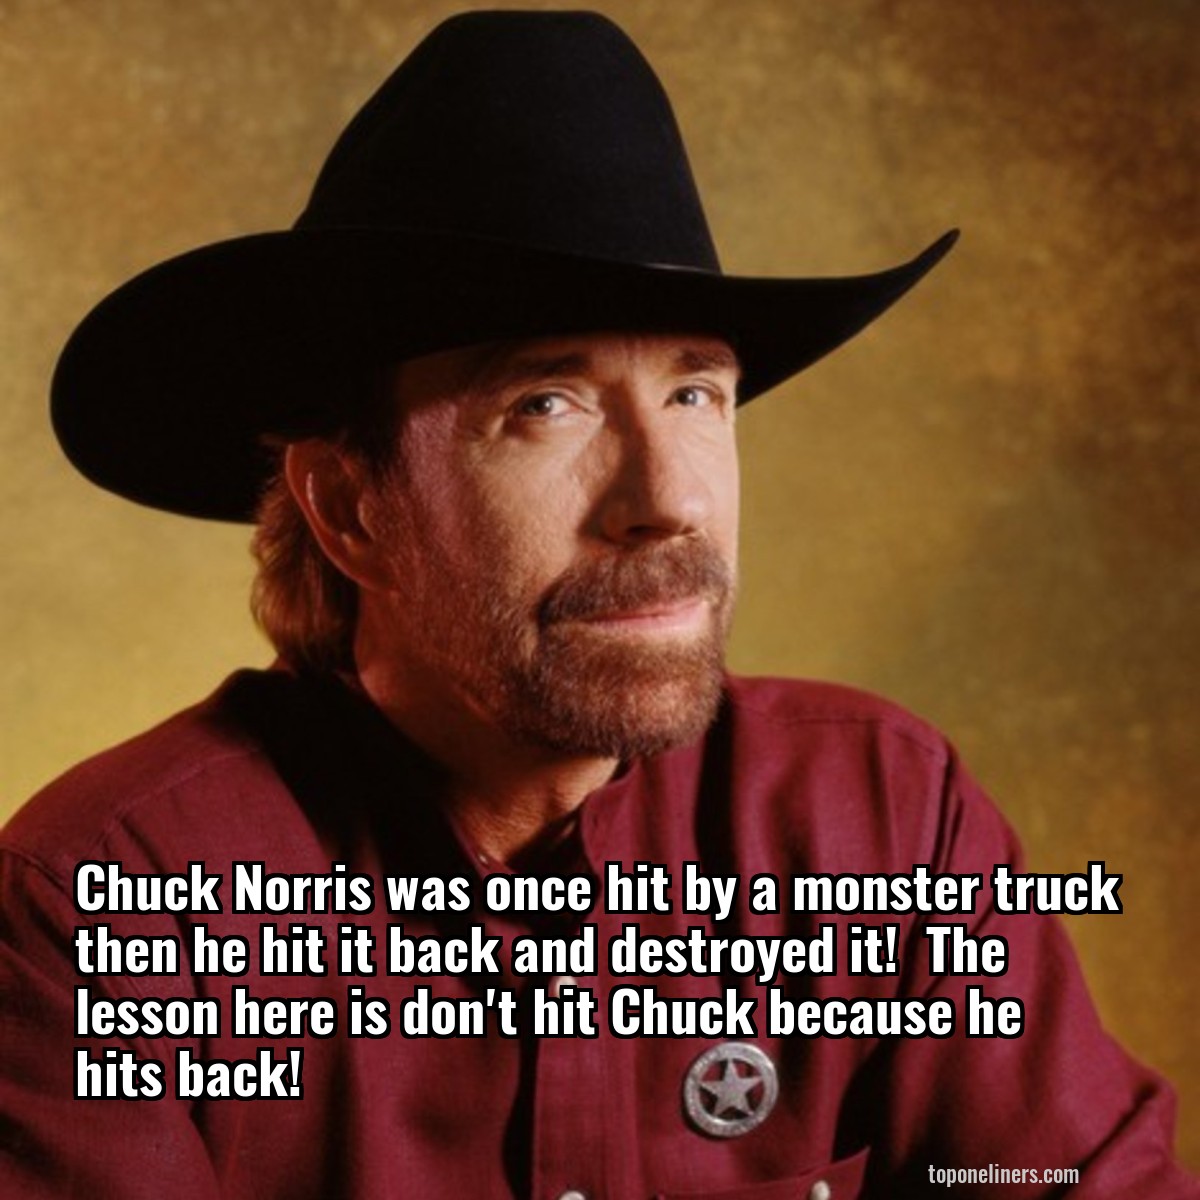 Chuck Norris was once hit by a monster truck then he hit it back and destroyed it!  The lesson here is don't hit Chuck because he hits back!